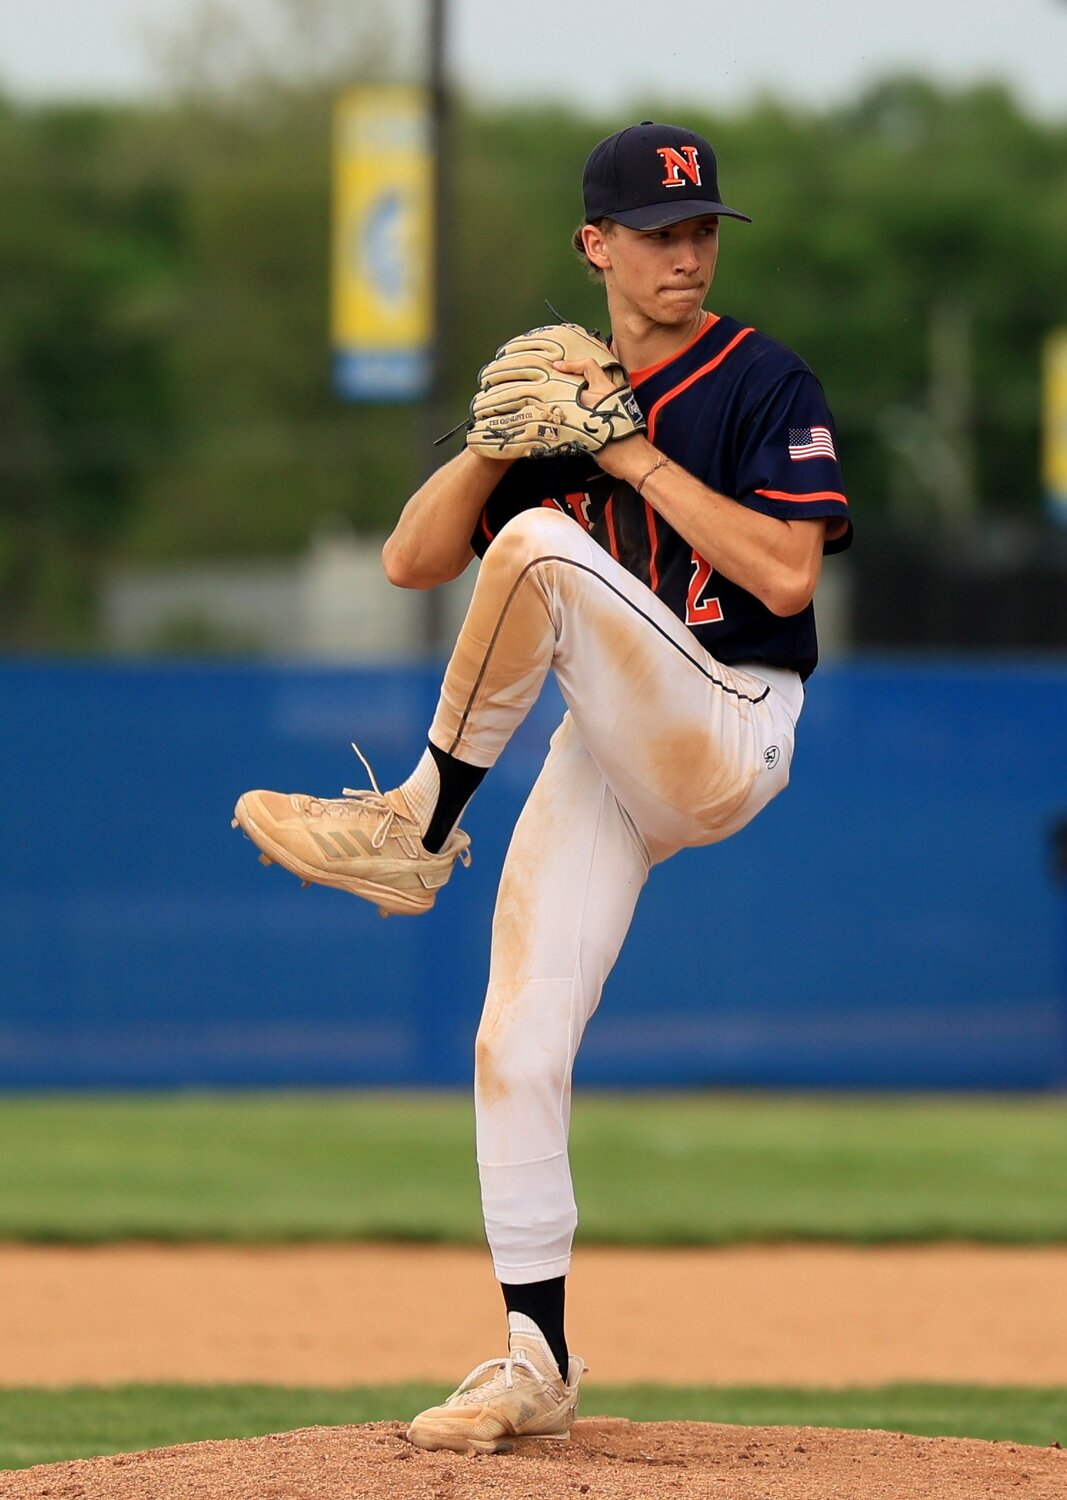 North Montgomery senior Roman Utterback scored the game winning run to put the Chargers in the Class 3A Sectional 20 Championship game on Monday, while also picking up the win on the mound.